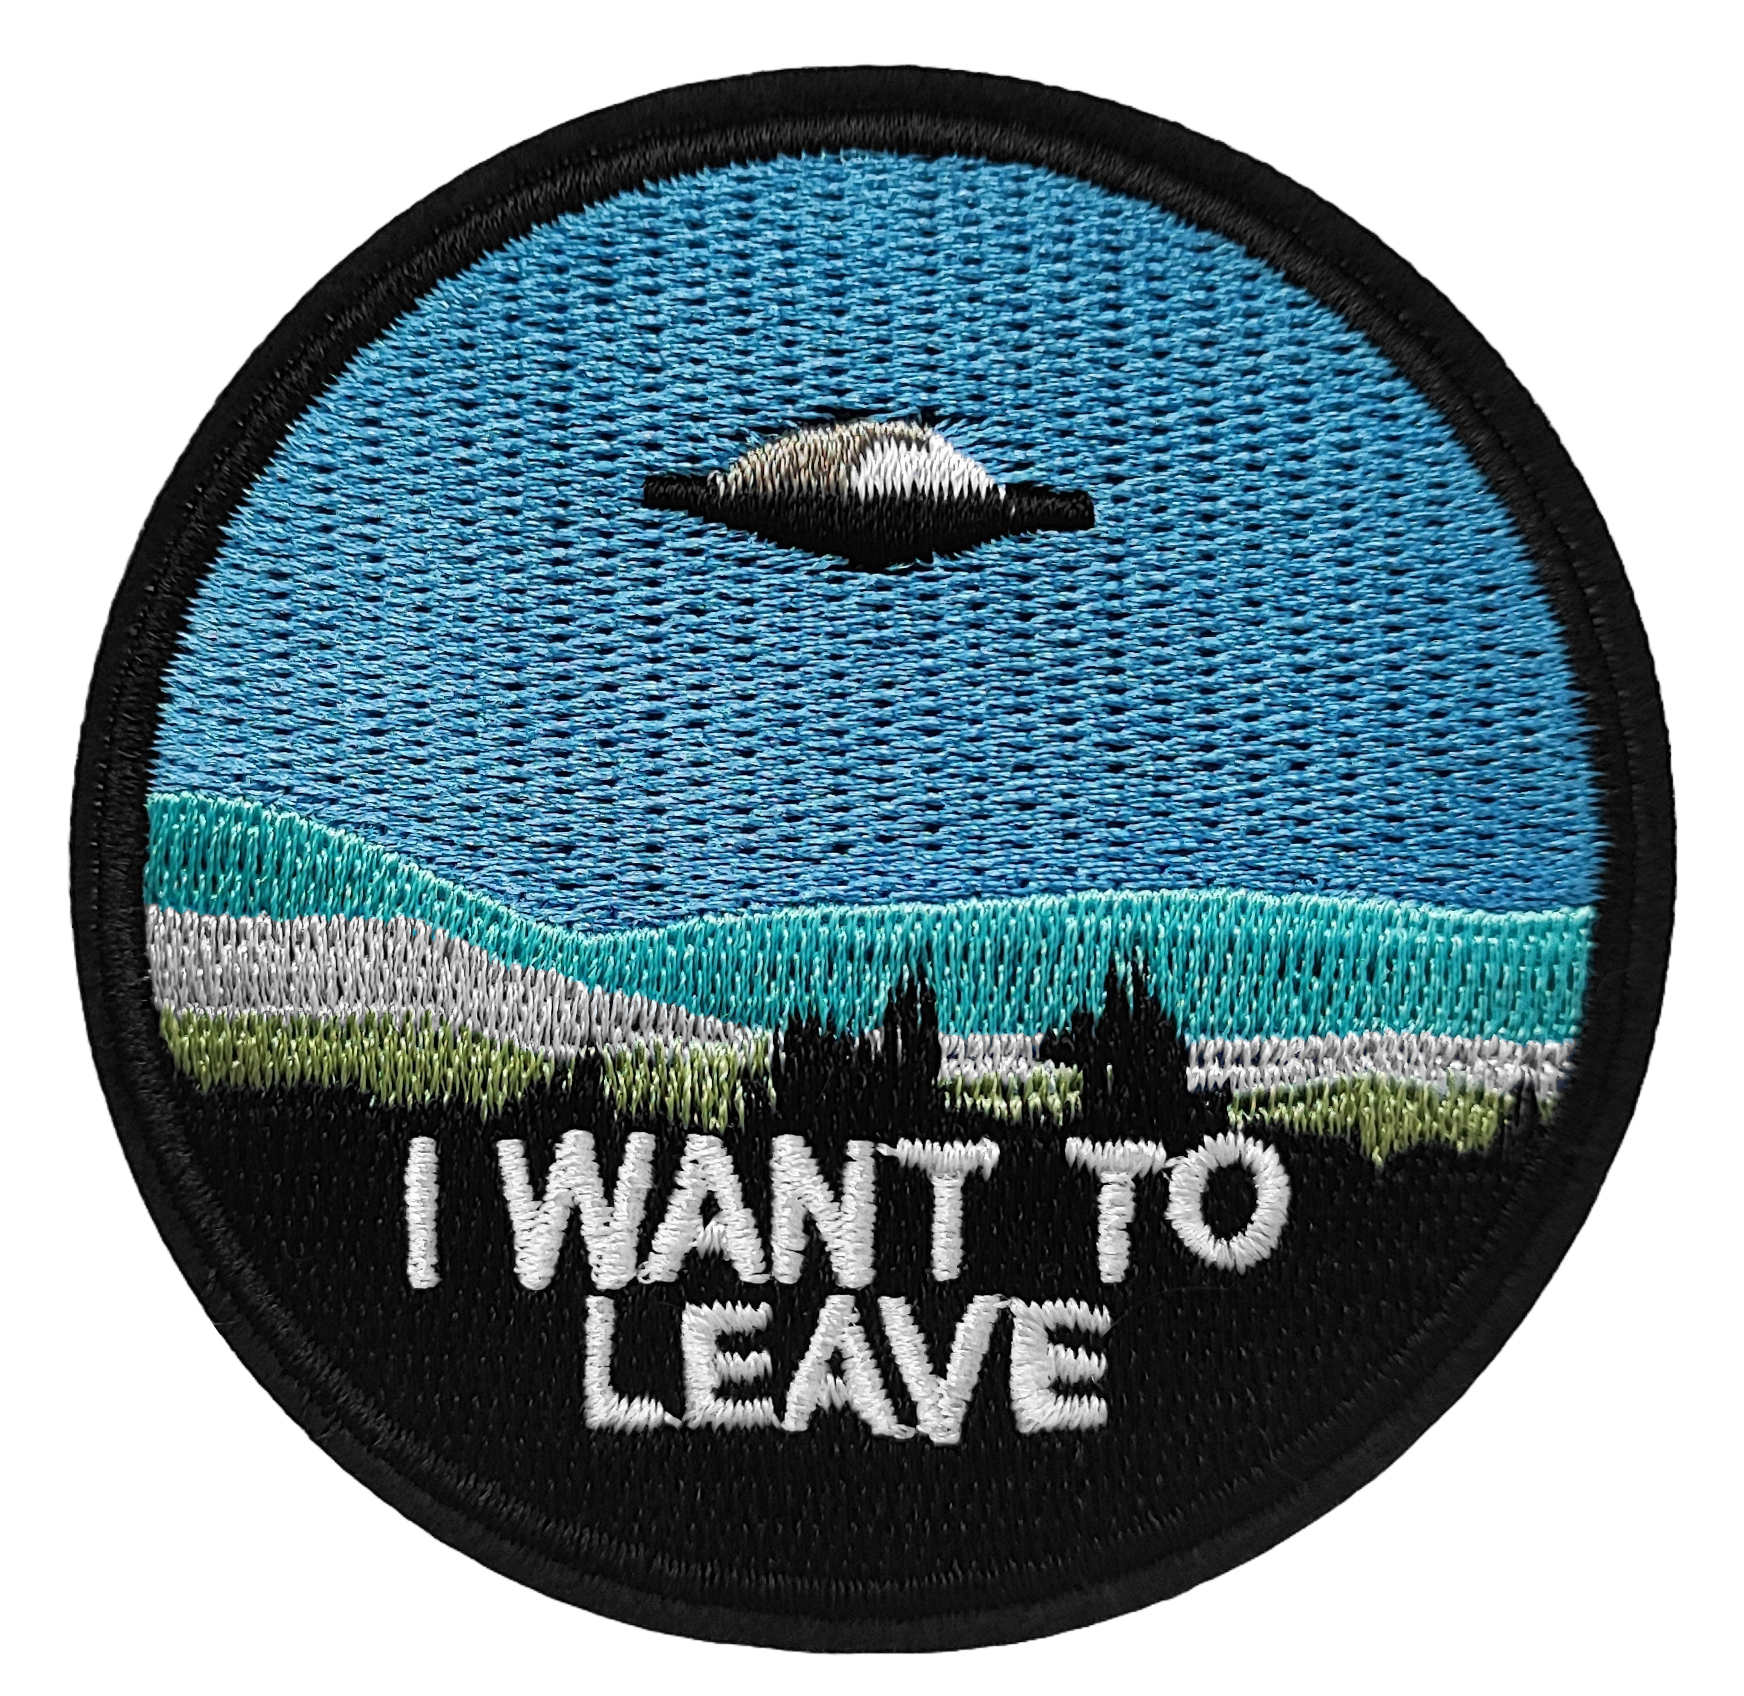 Patch OVNI UFO soucoupe volante I want to leave 0